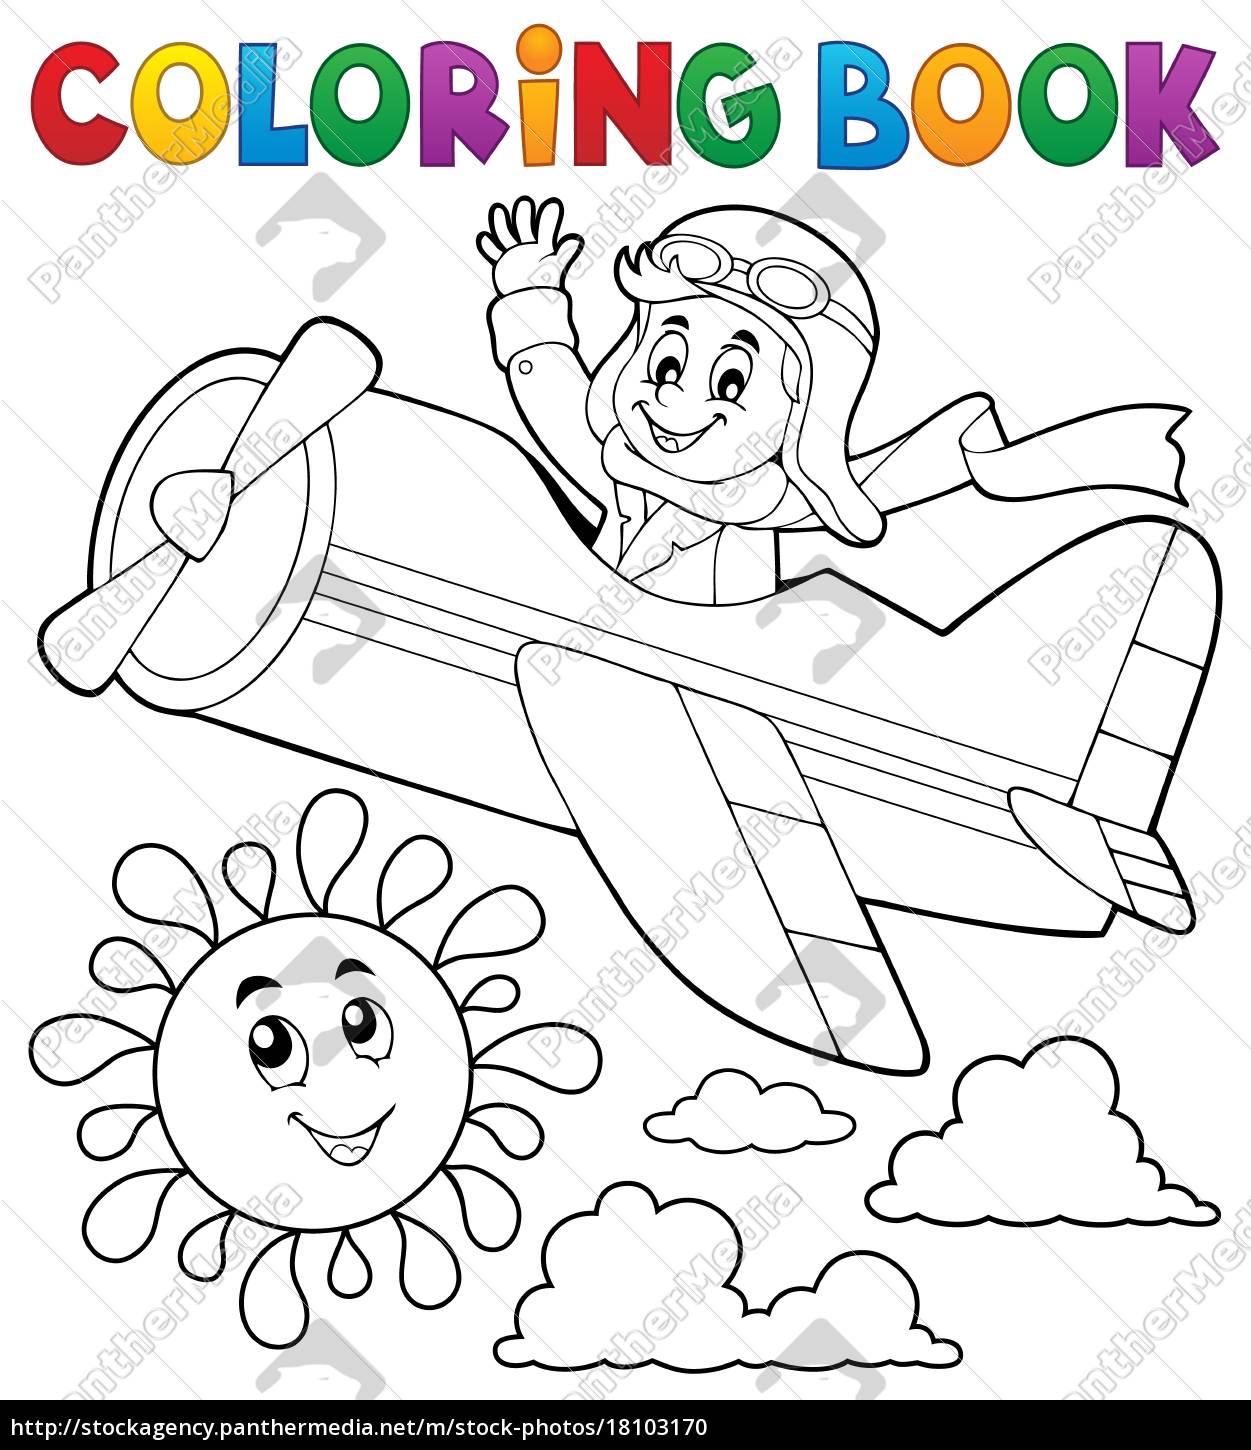 Coloring book pilot in retro airplane   Royalty free image ...